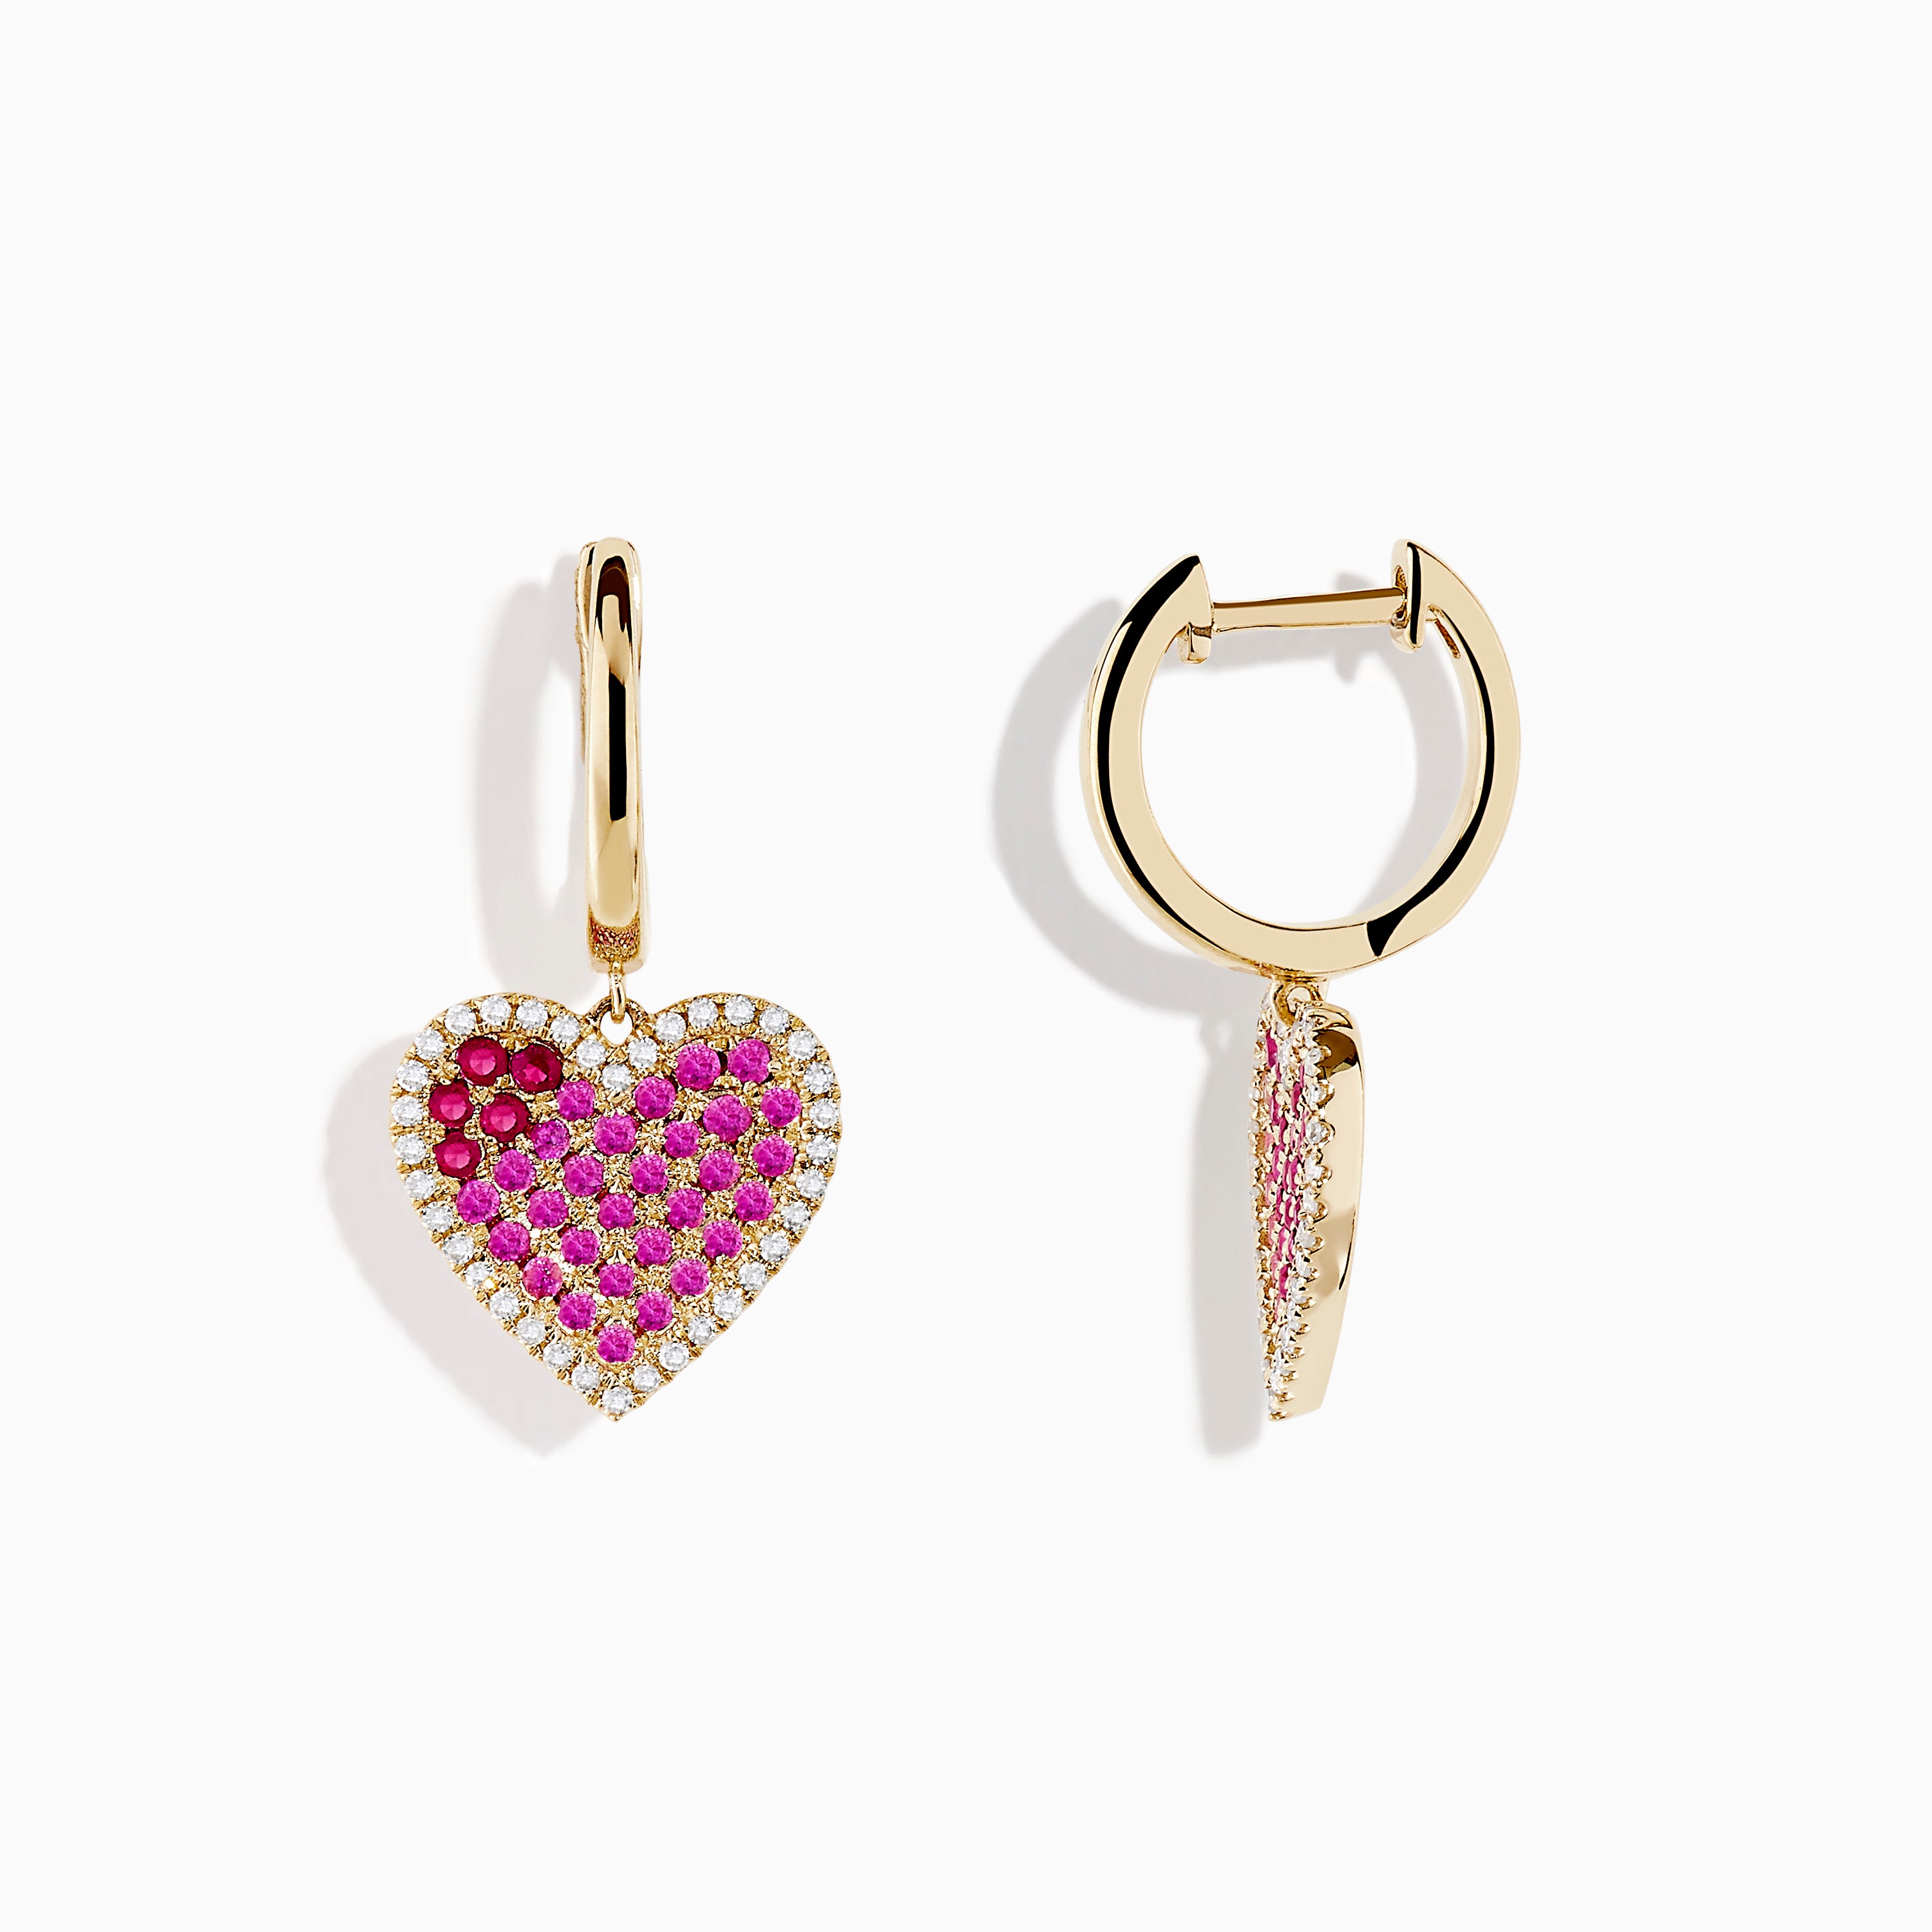 Effy Novelty 14K Yellow Gold Ruby, Pink Sapphire and Diamond Heart Earrings